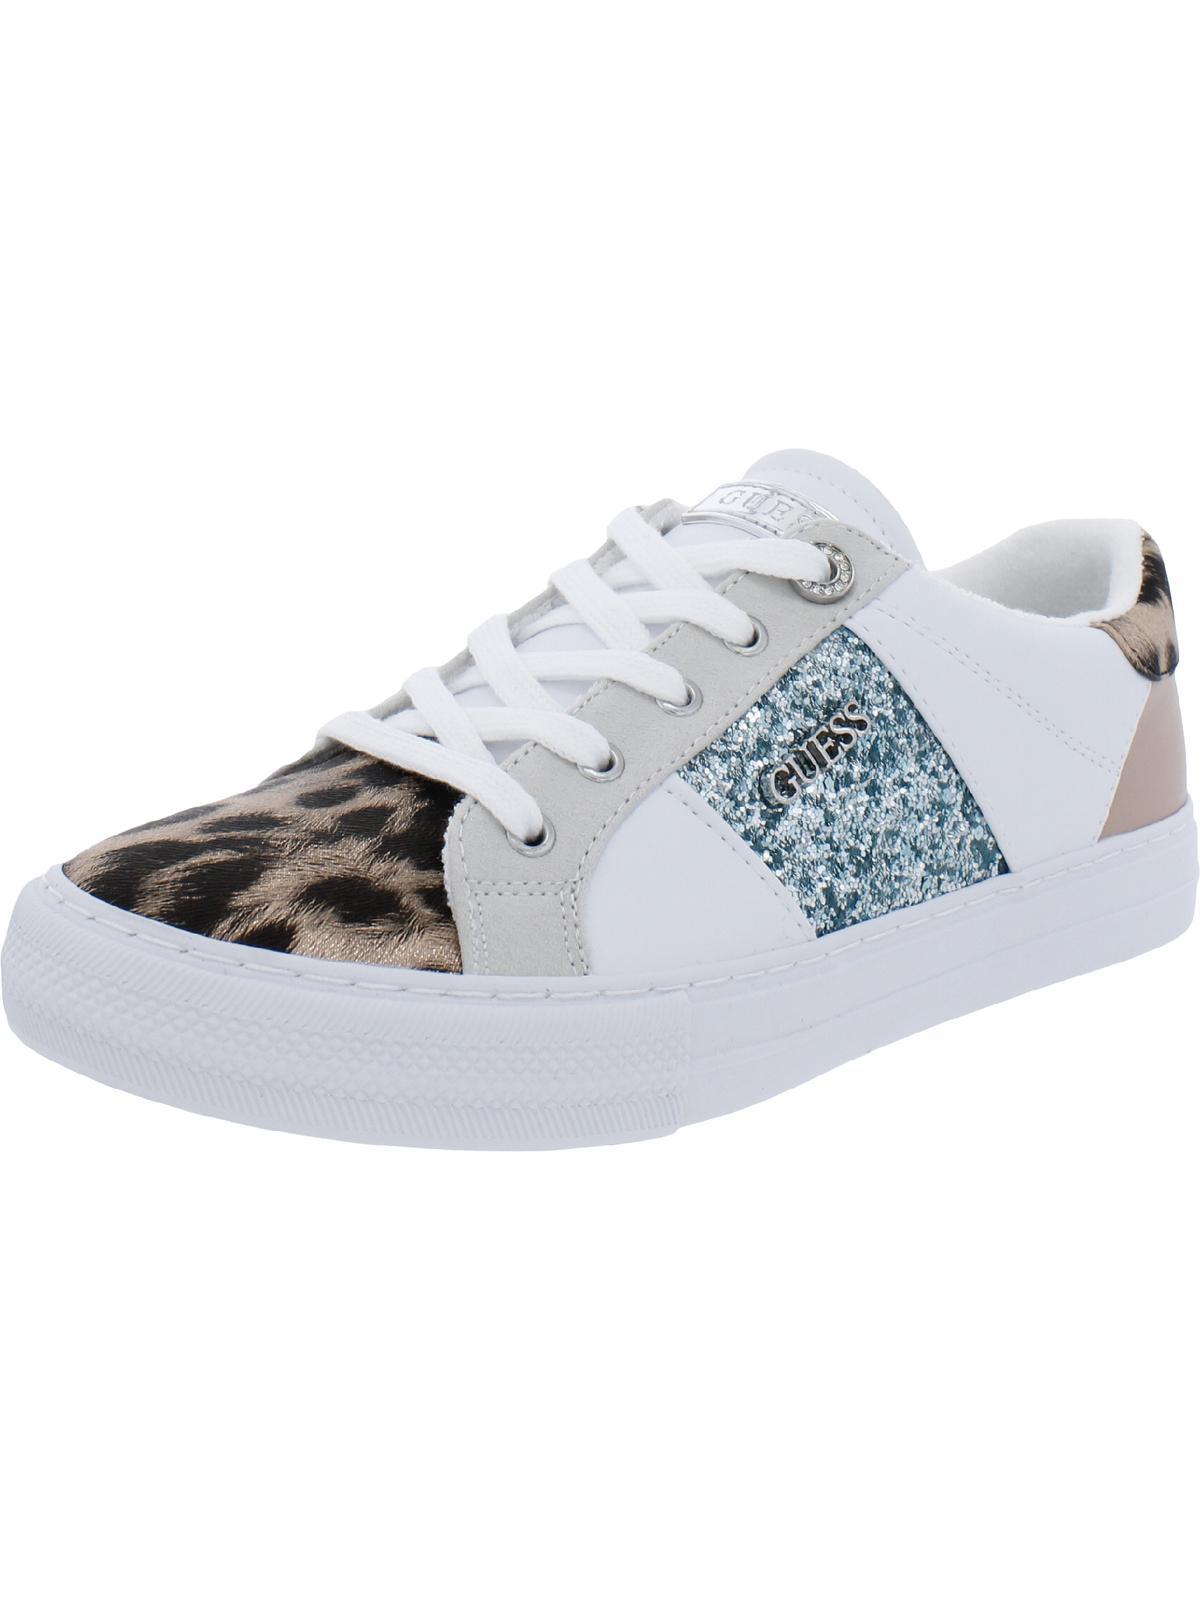 Guess Loven Glitter Lace Up Casual And Fashion Sneakers in Blue | Lyst